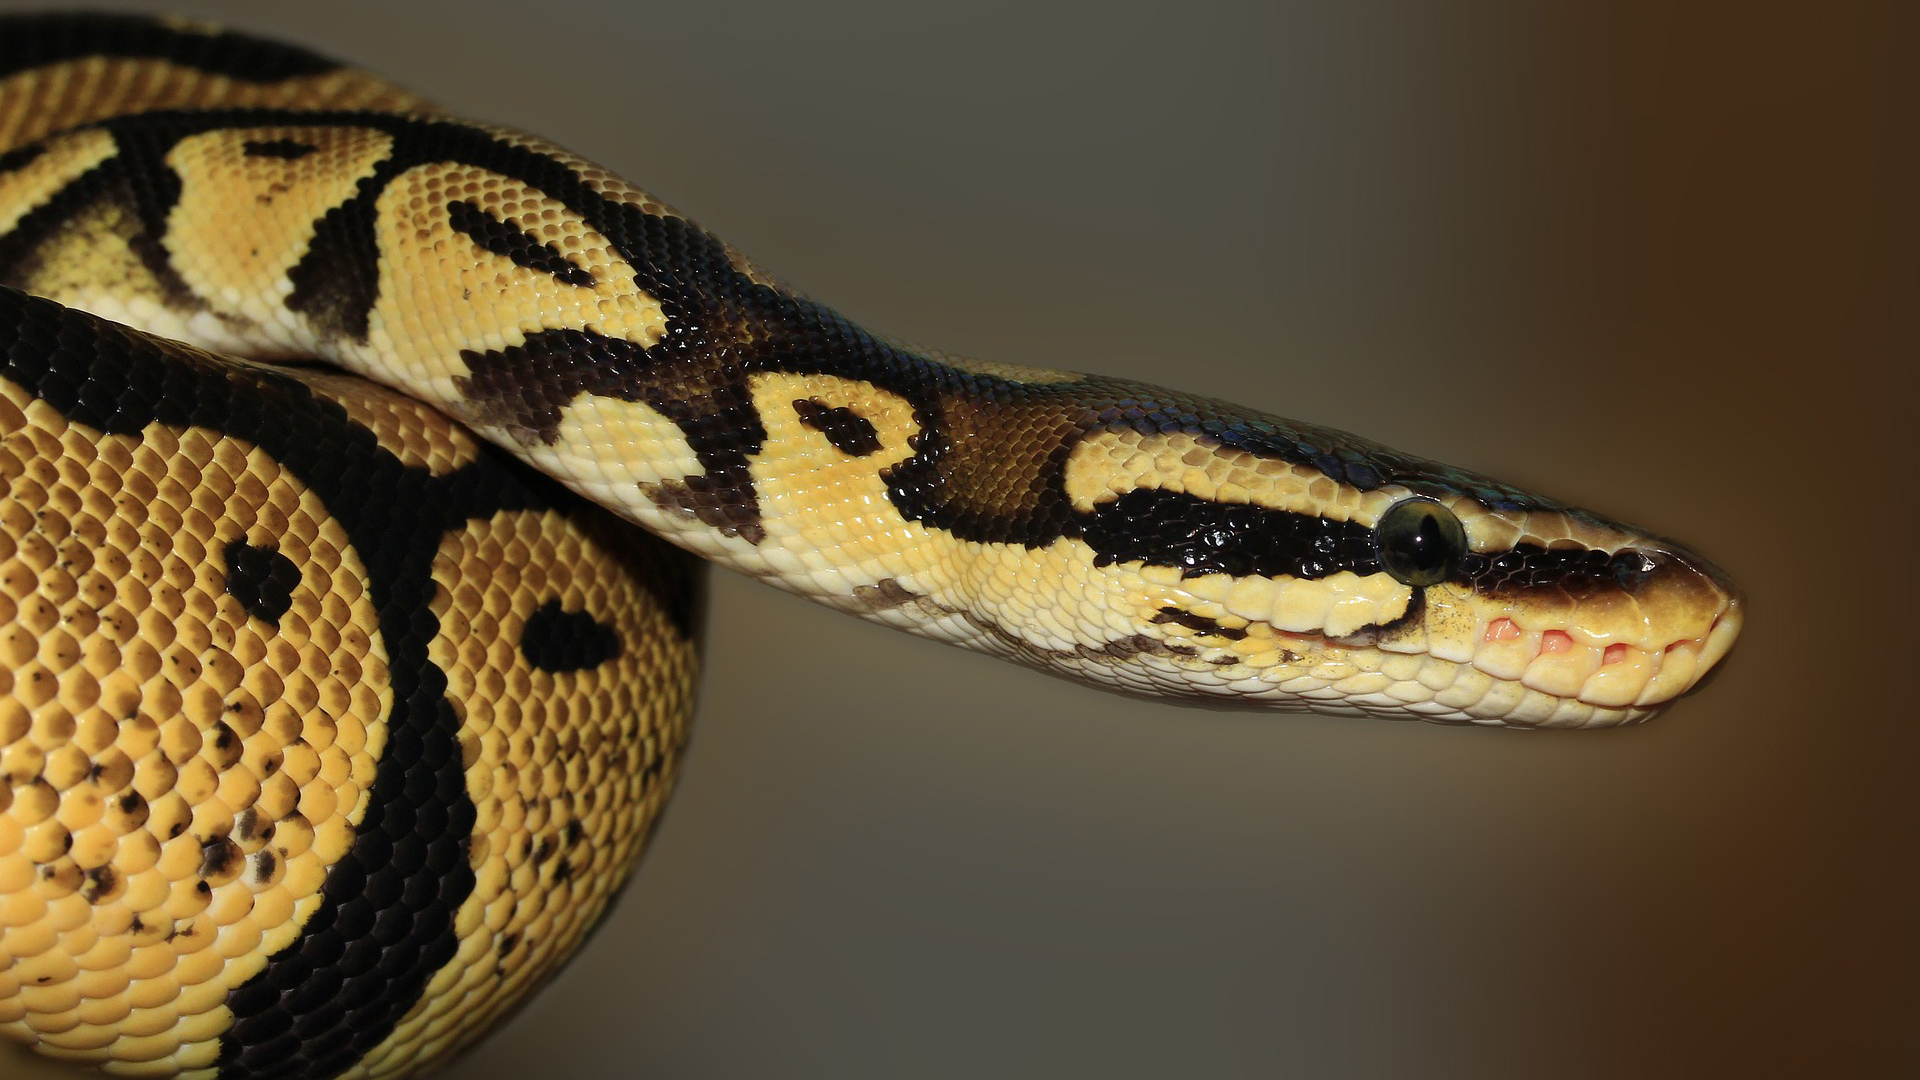 Close of of the head of a snake with yellow and black markings